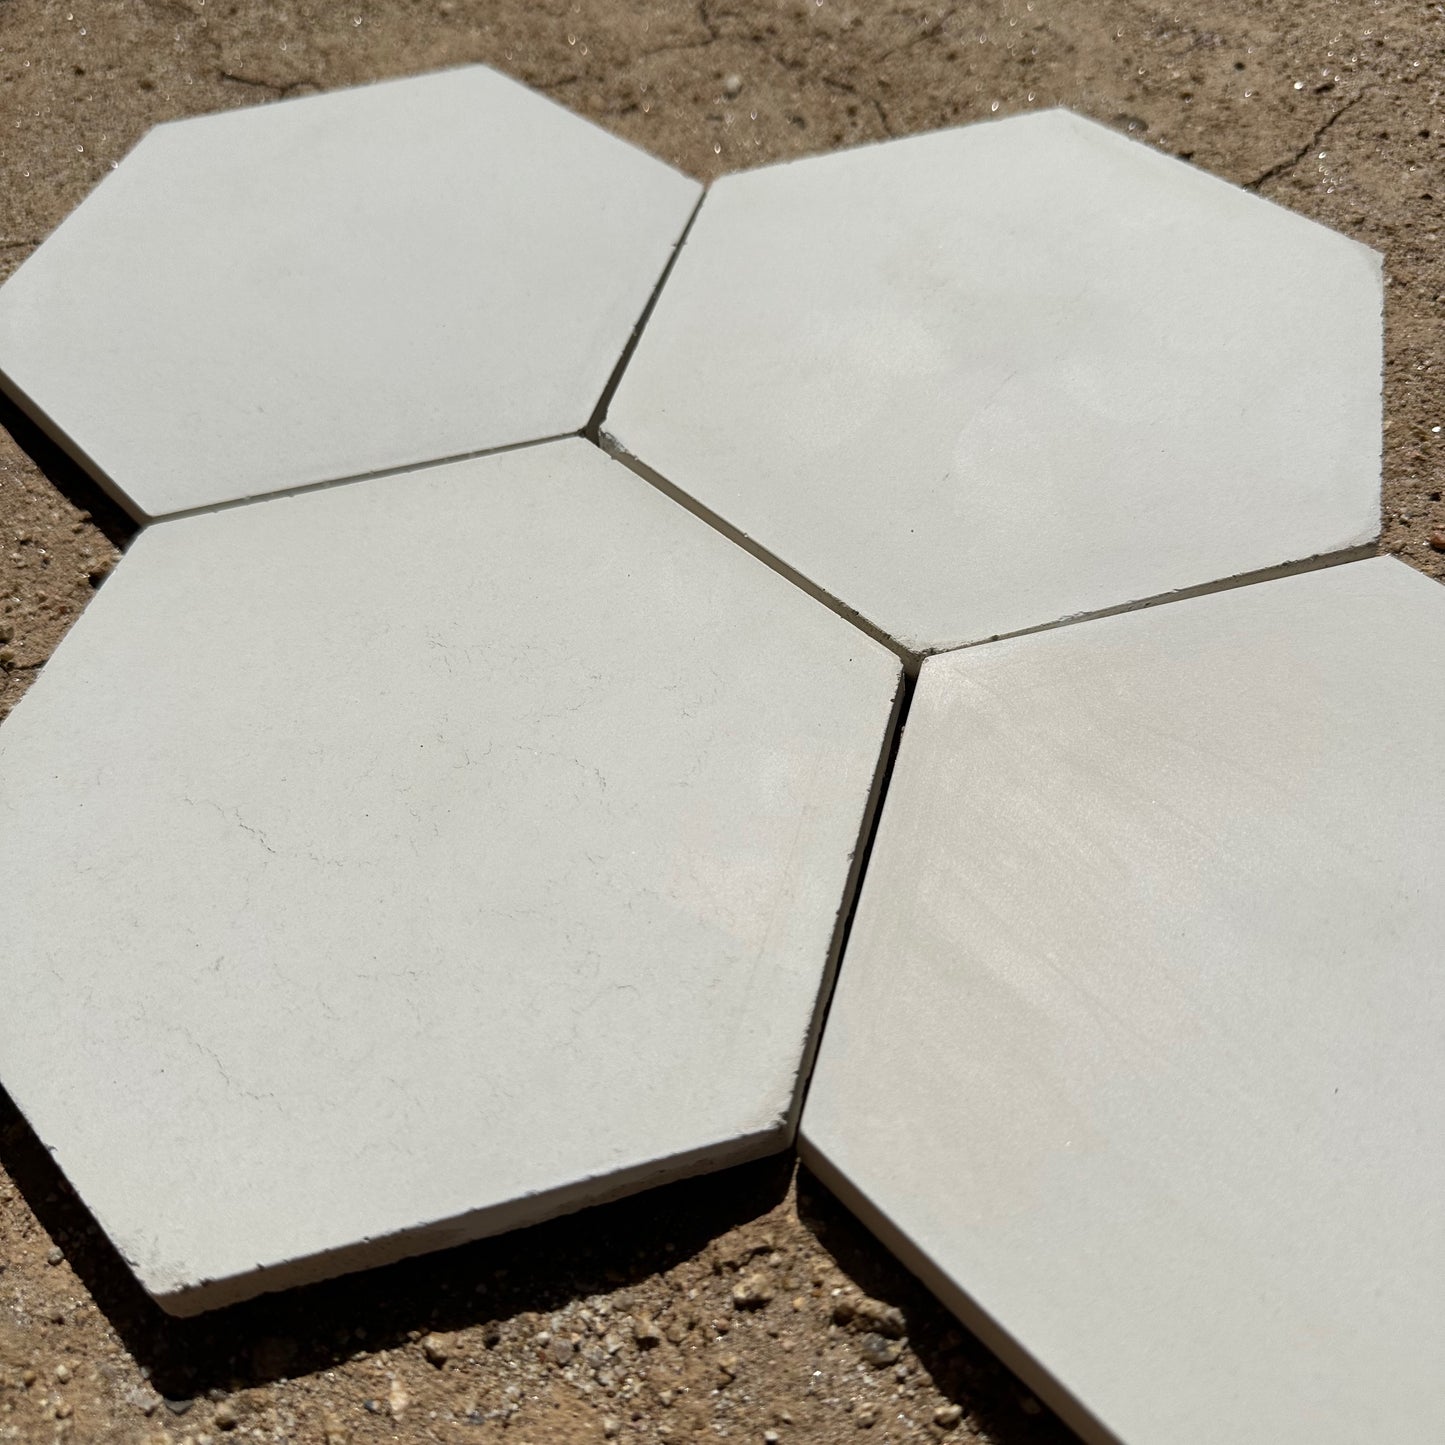 Tesselle | Concord White 7"x6" Hexagonal Cement Wall Tile